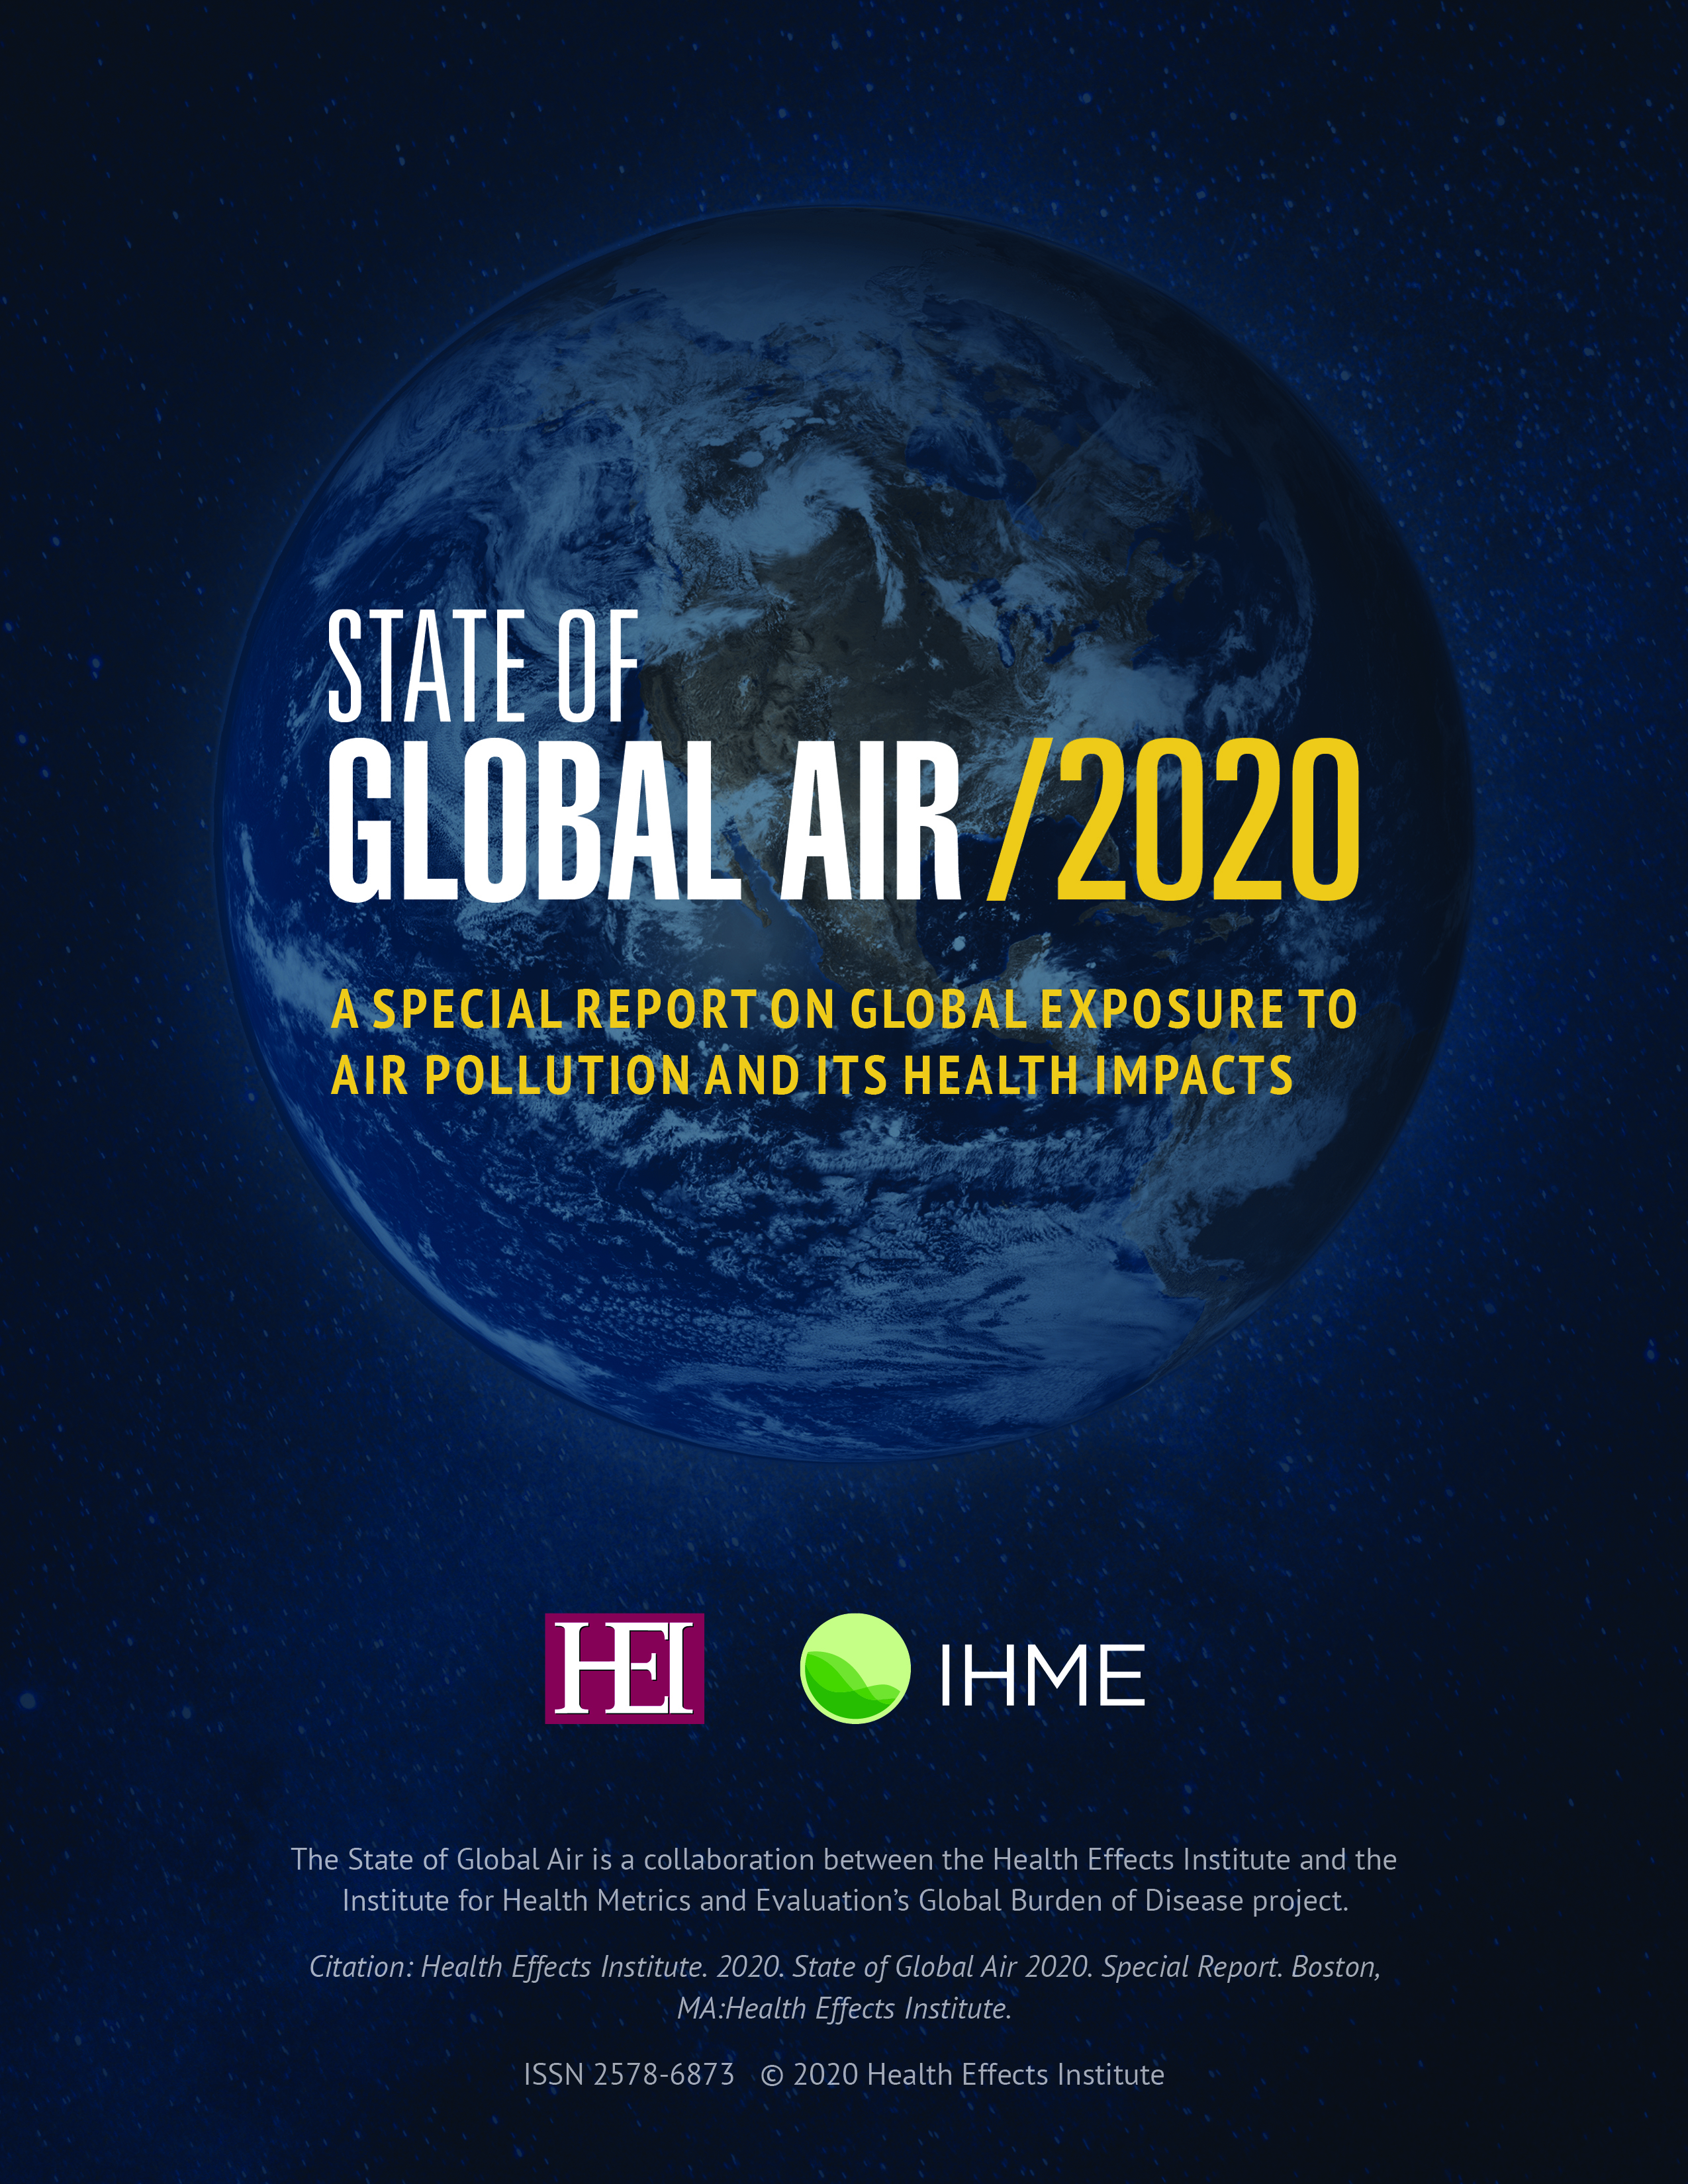 State of Global Air 2020: A Special Report on Global Exposure to Air Pollution and its Health Impacts